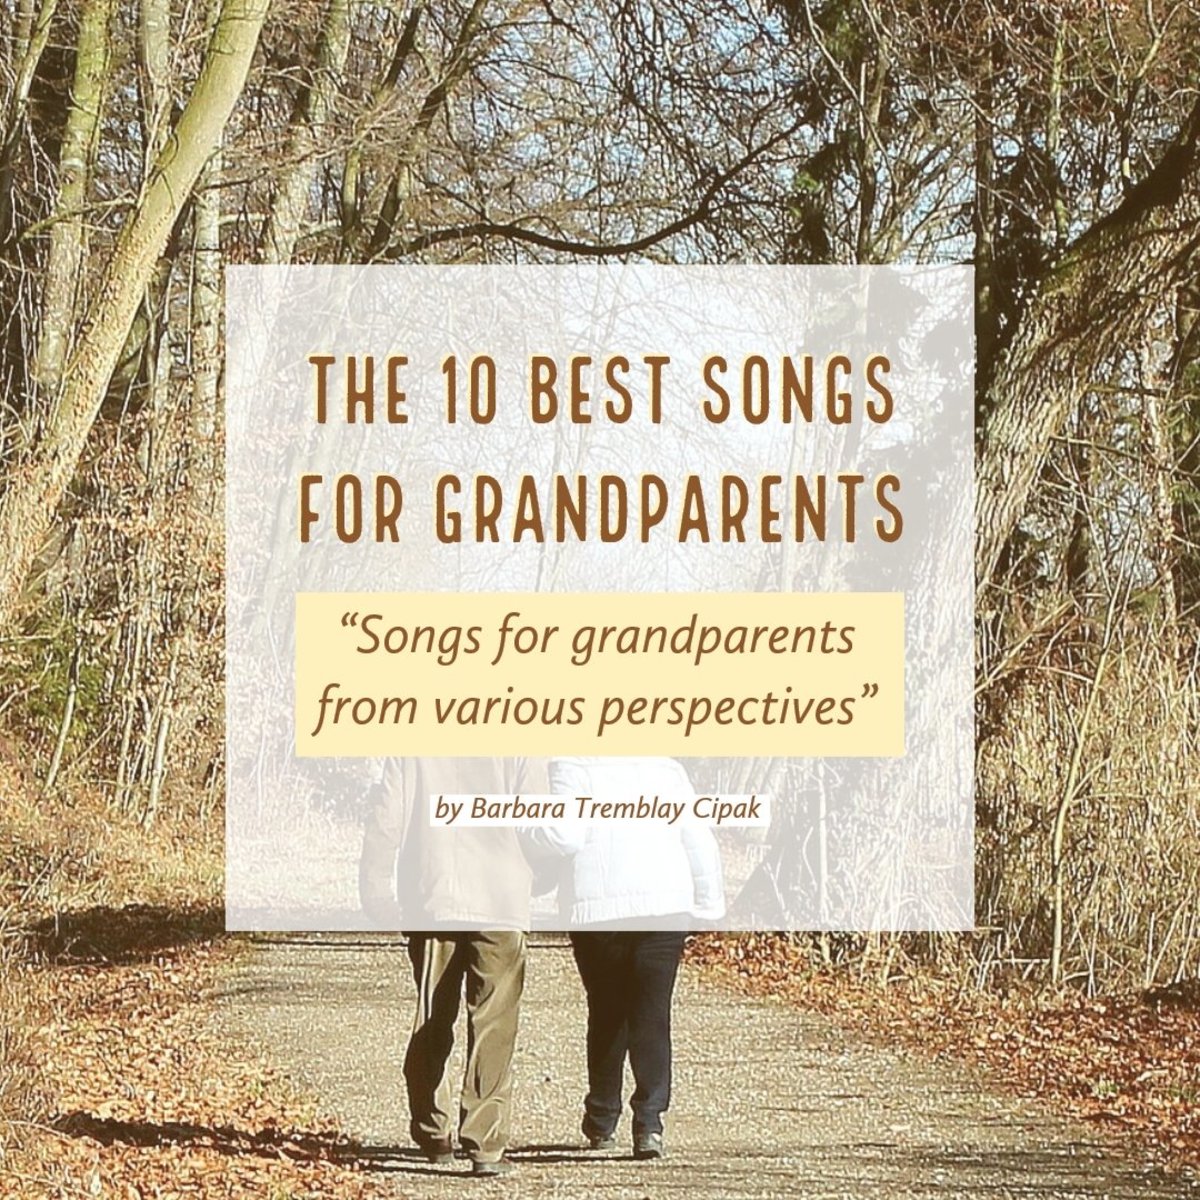 The 10 Best Songs for Grandparents | Spinditty